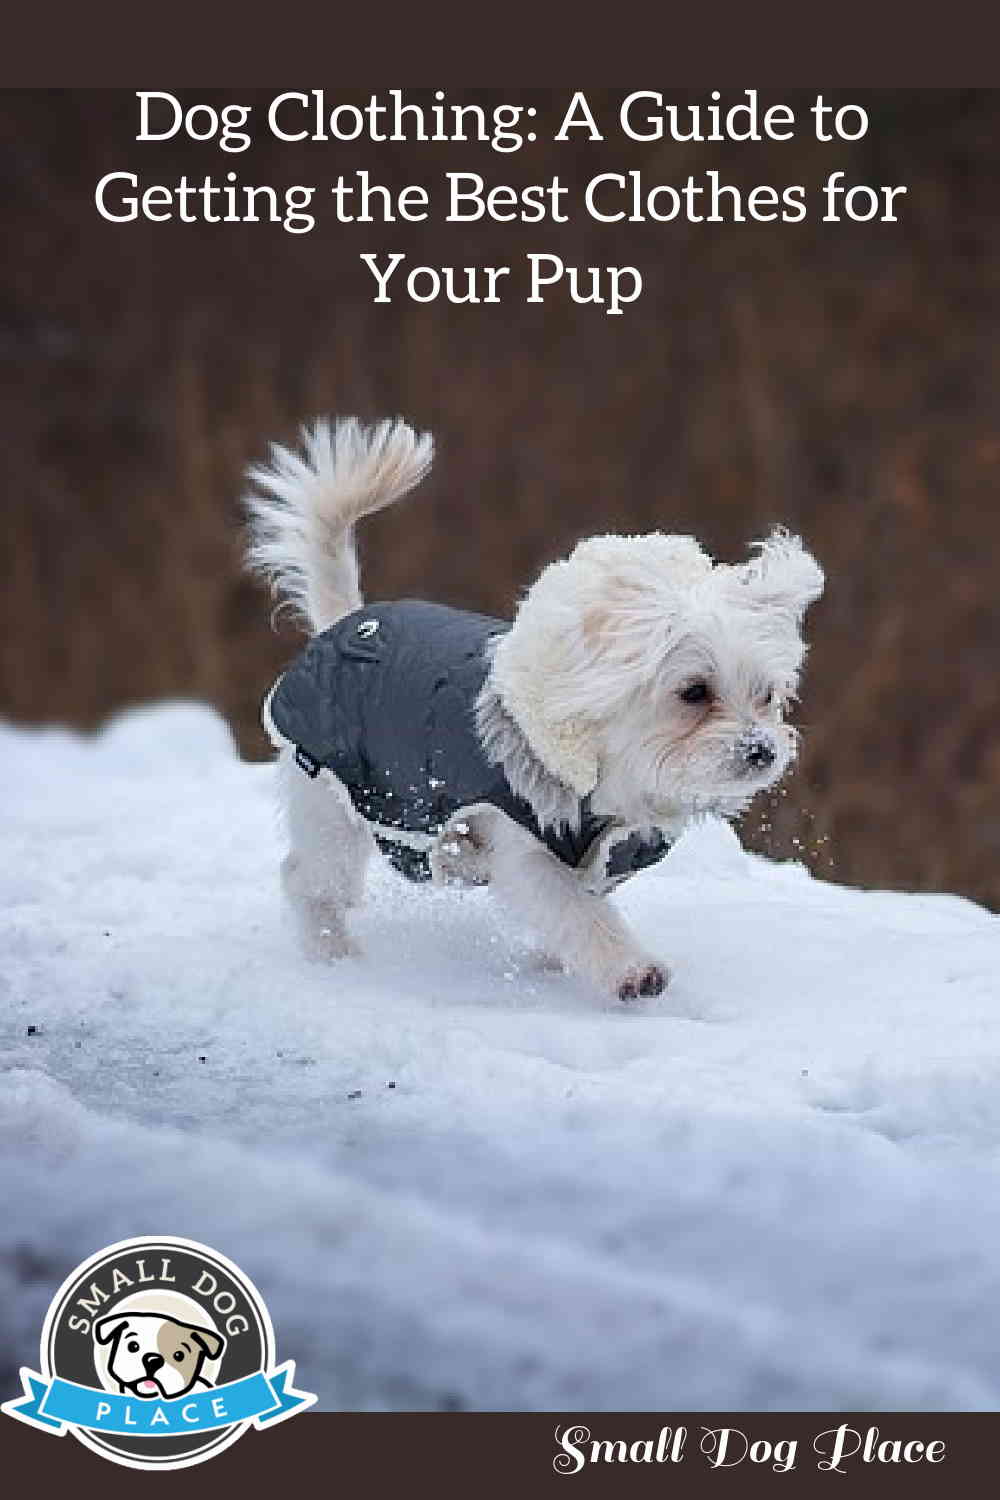 A Maltese dog is wearing a winter coat for dogs